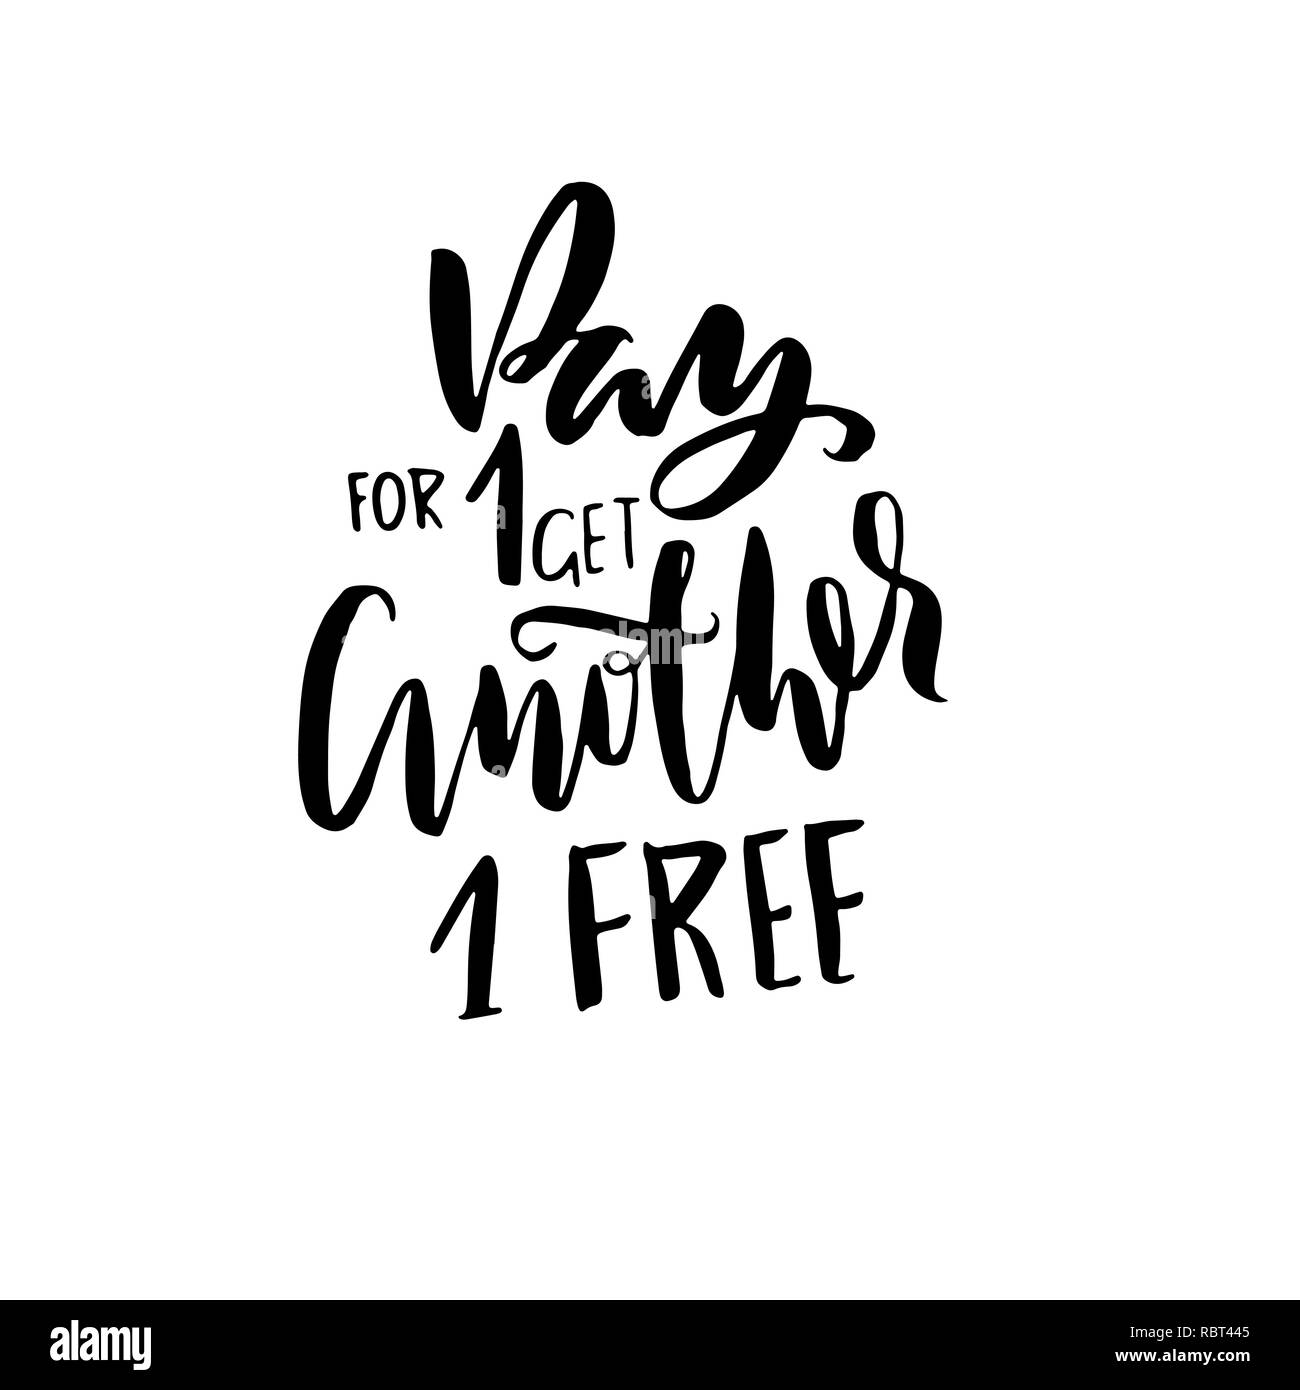 Pay for one get another one free. Handdrawn lettering. Coupon typography banner. Hand drawn vector illustration. Stock Vector